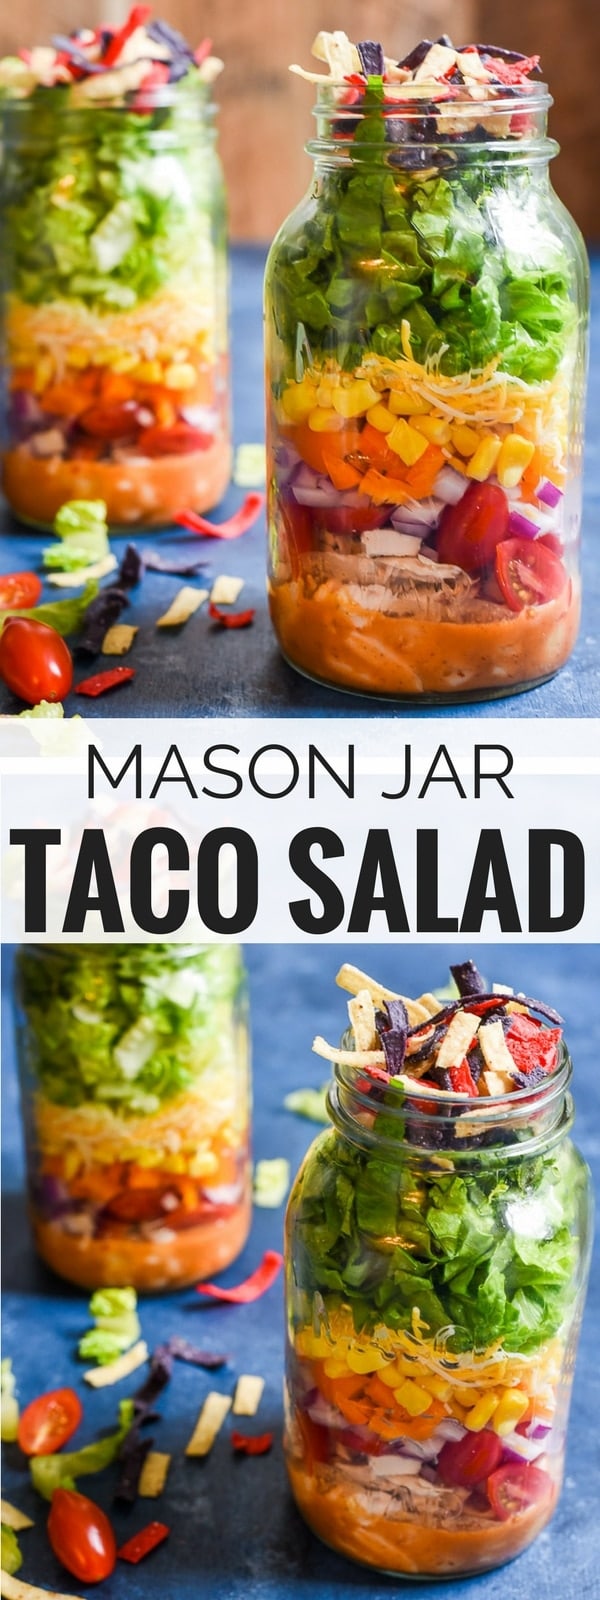 Mason Jar Taco Salads with a smoky chipotle honey vinaigrette is the perfect grab-and-go lunch!